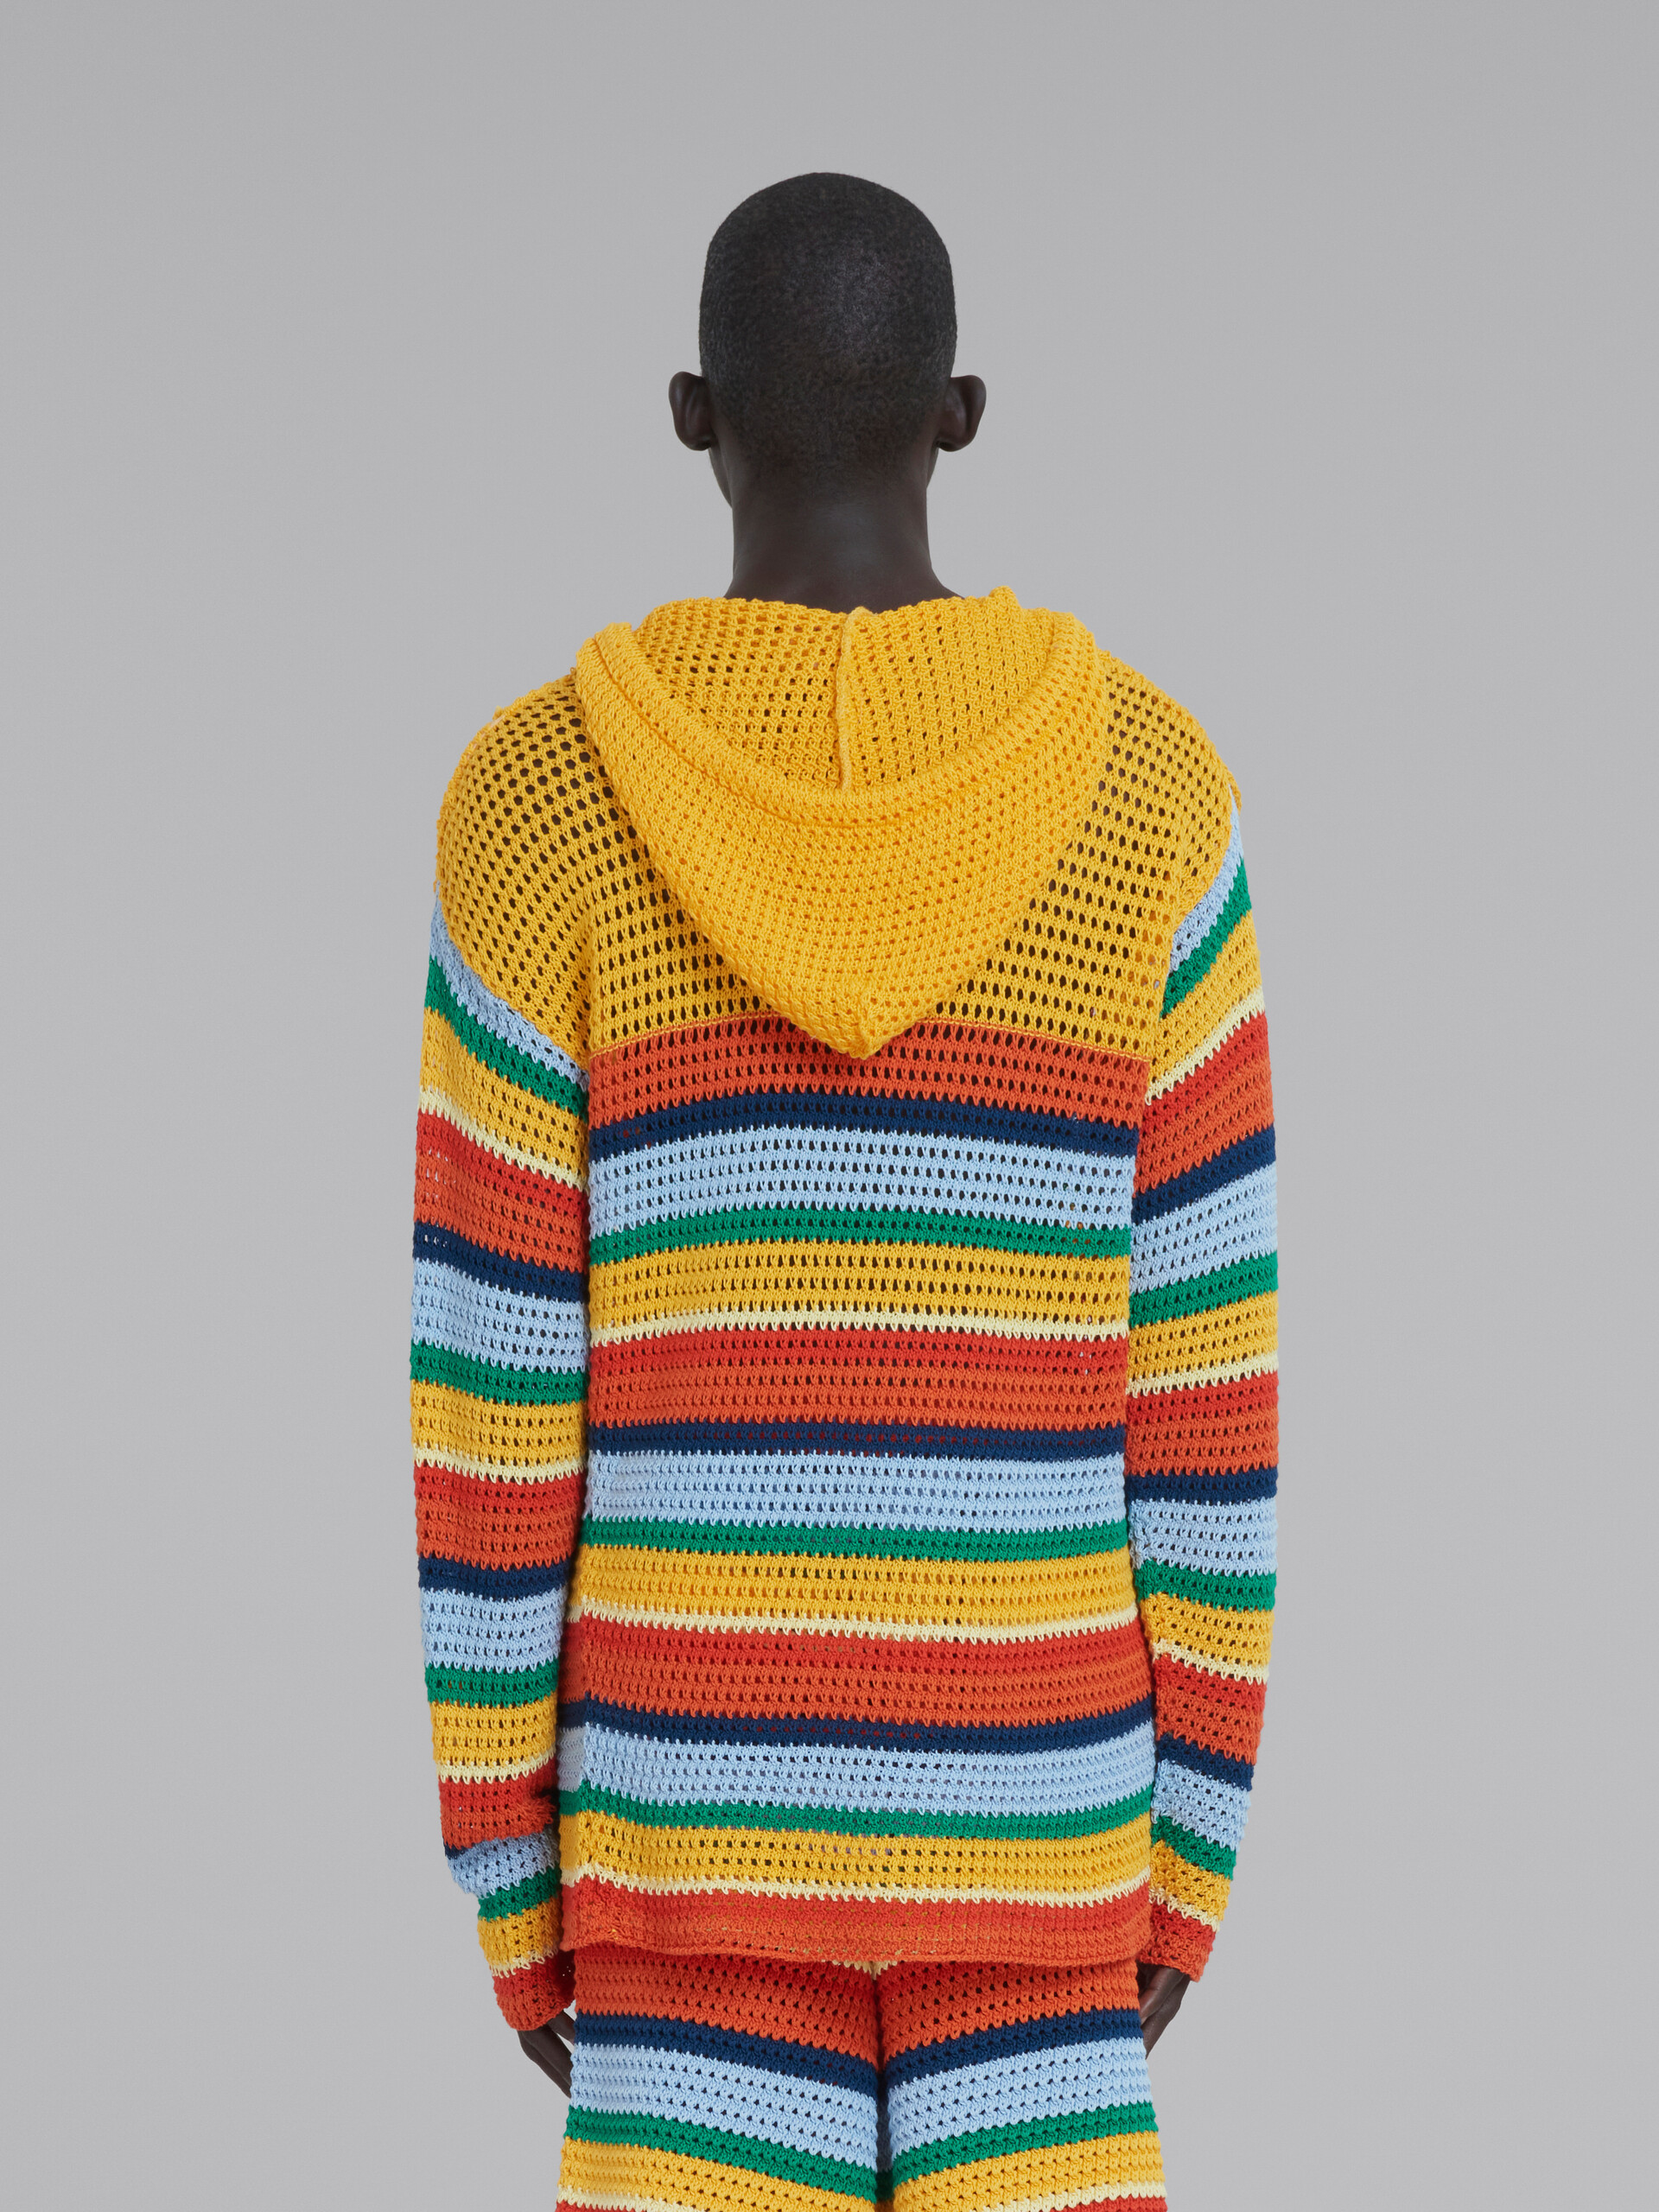 Marni x No Vacancy Inn - Multicolour cotton-knit hoodie - Pullovers - Image 3